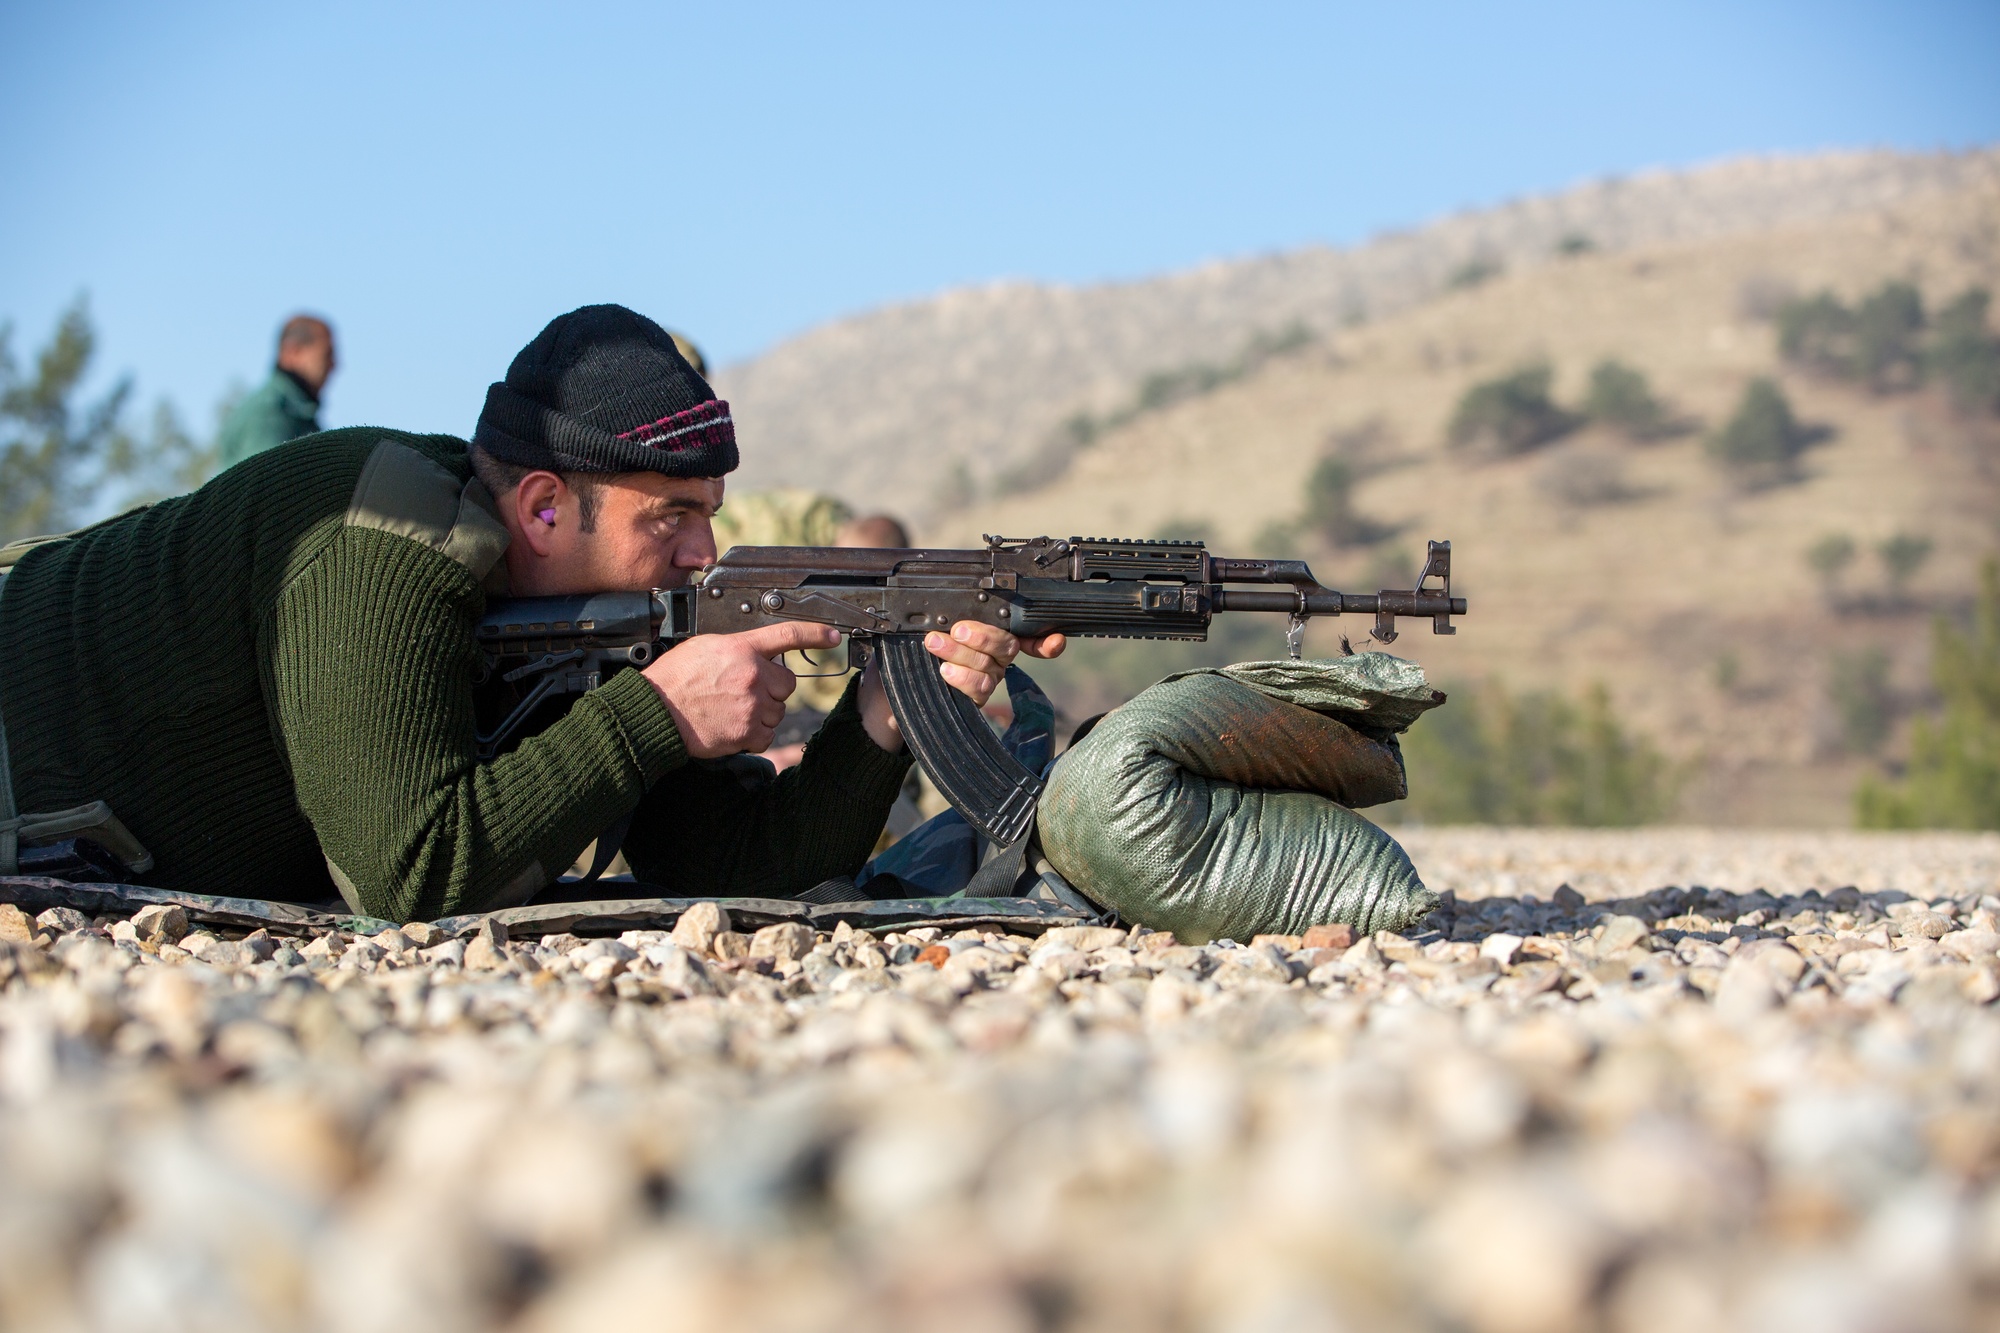 DVIDS - Images - ISF AK-47 training led by Spanish Guardia Civil GAR [Image  5 of 7]